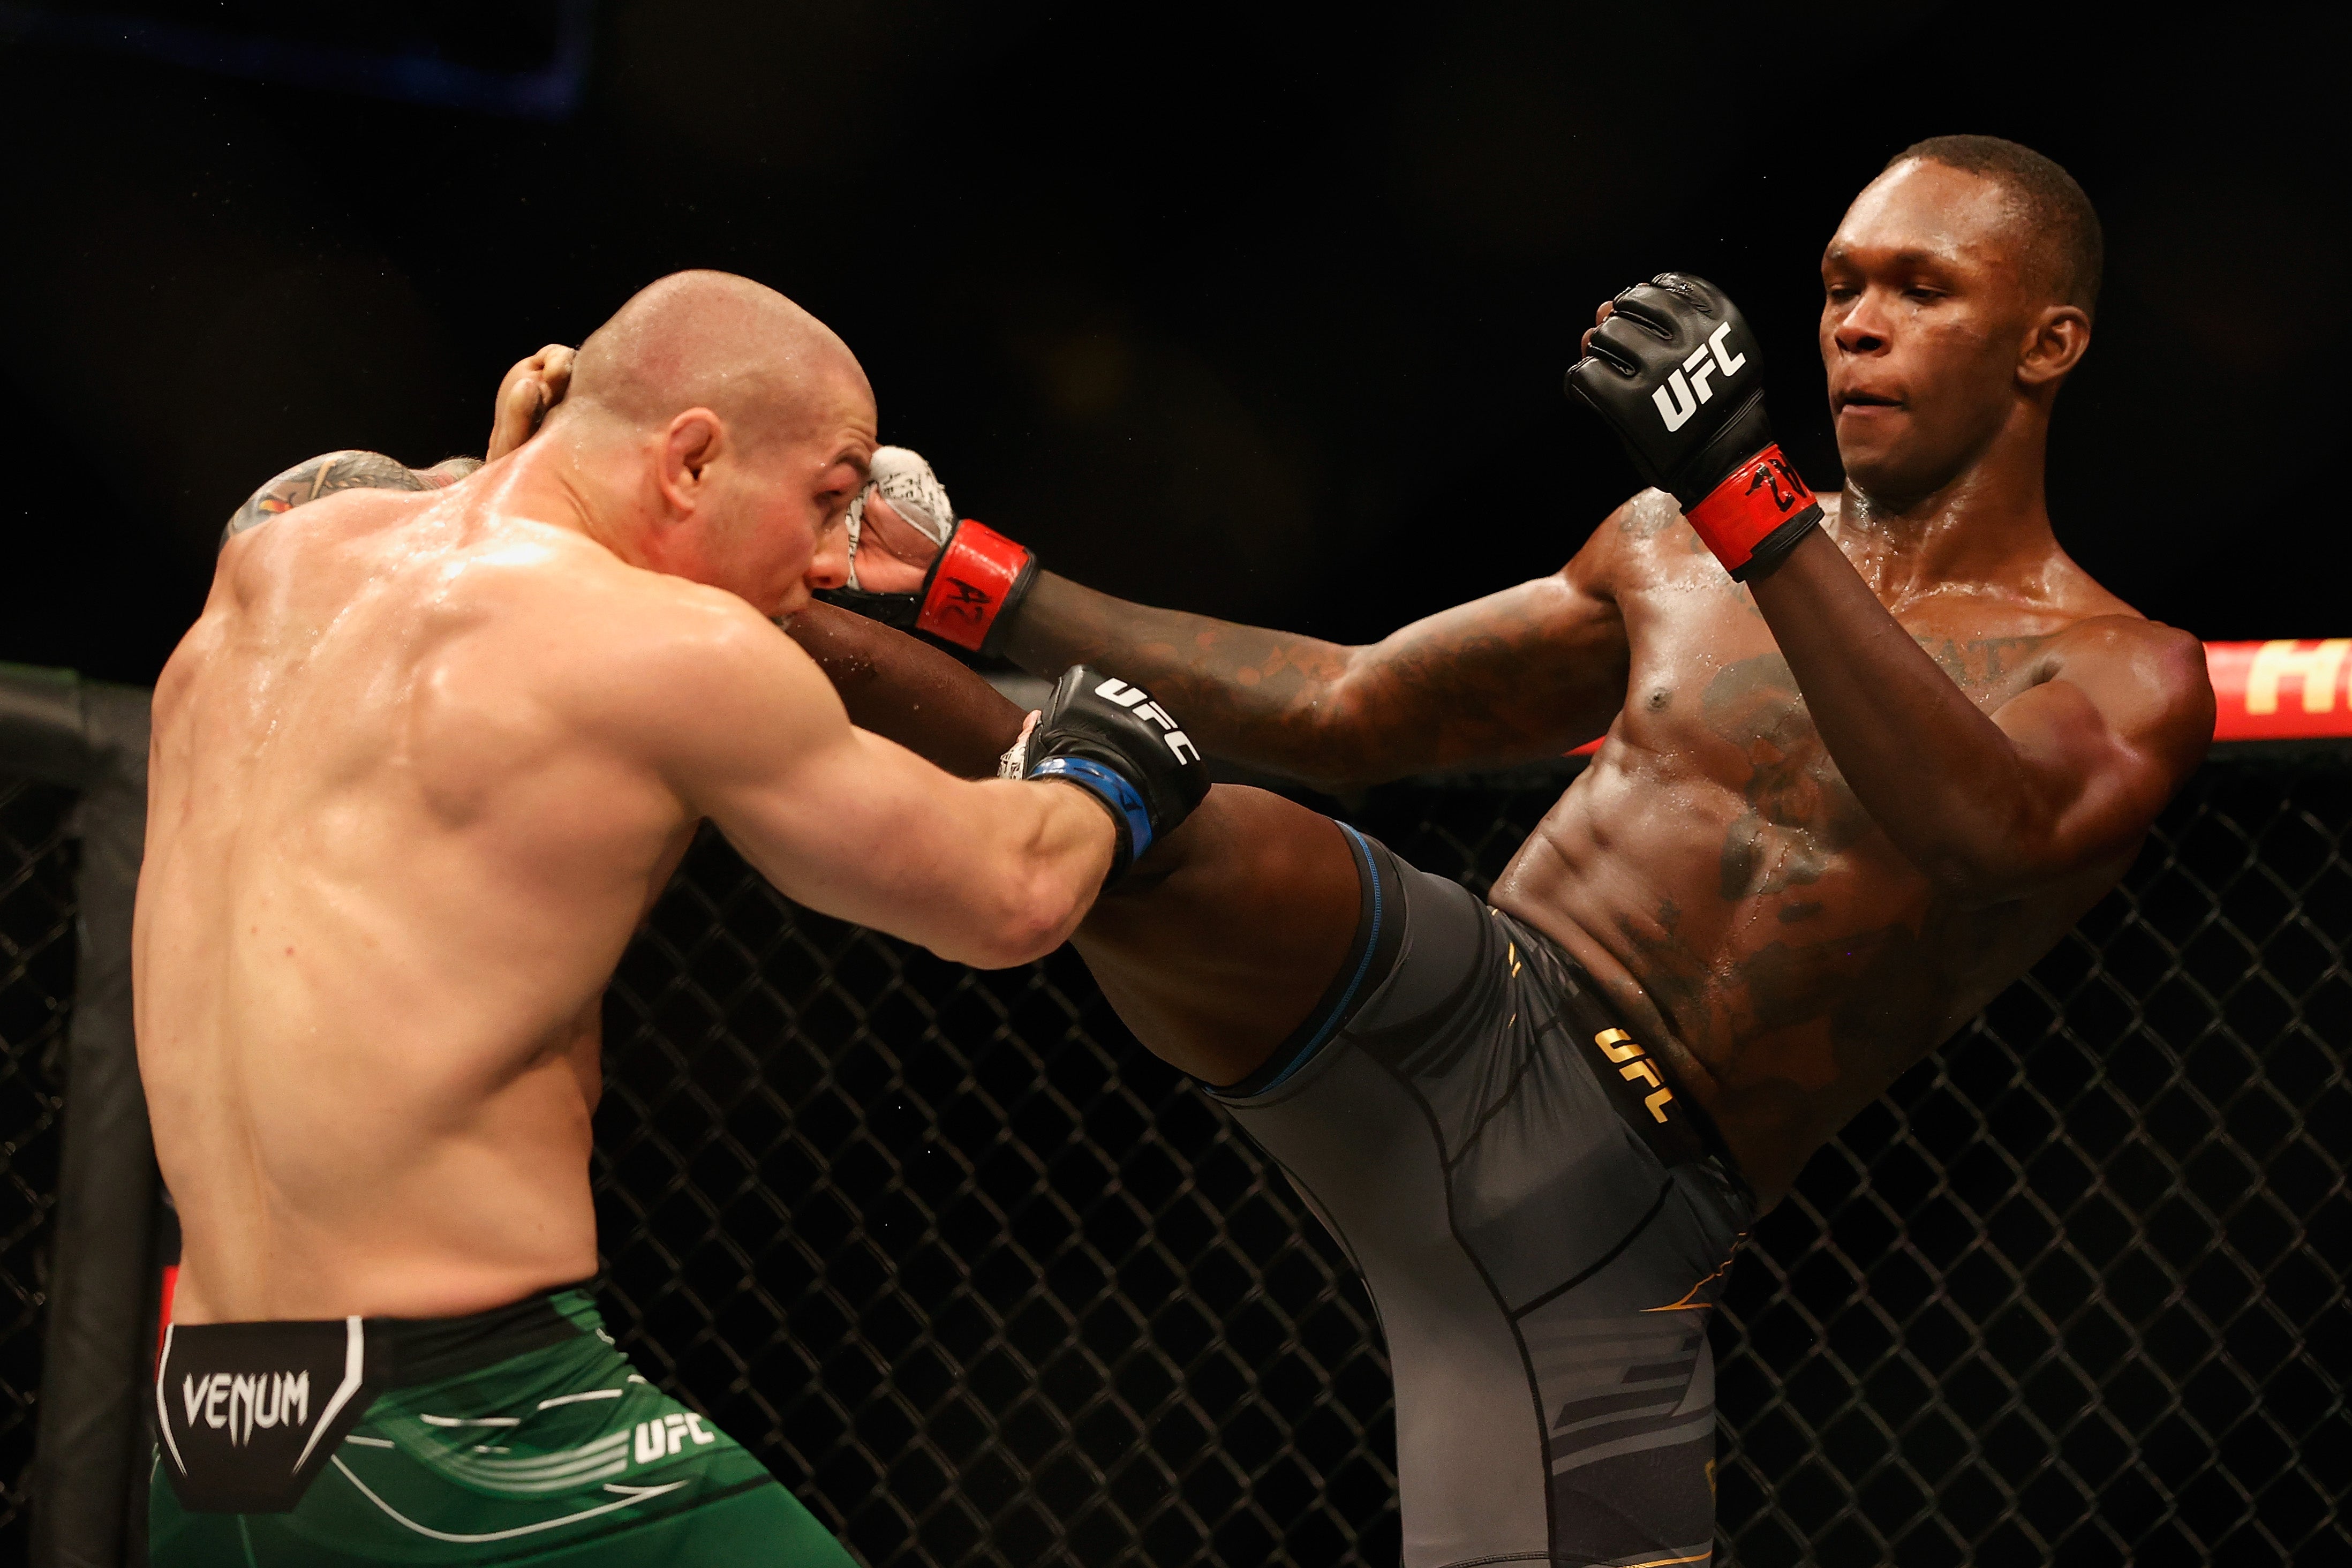 Adesanya outpointed Marvin Vettori last time out to retain the UFC middleweight title